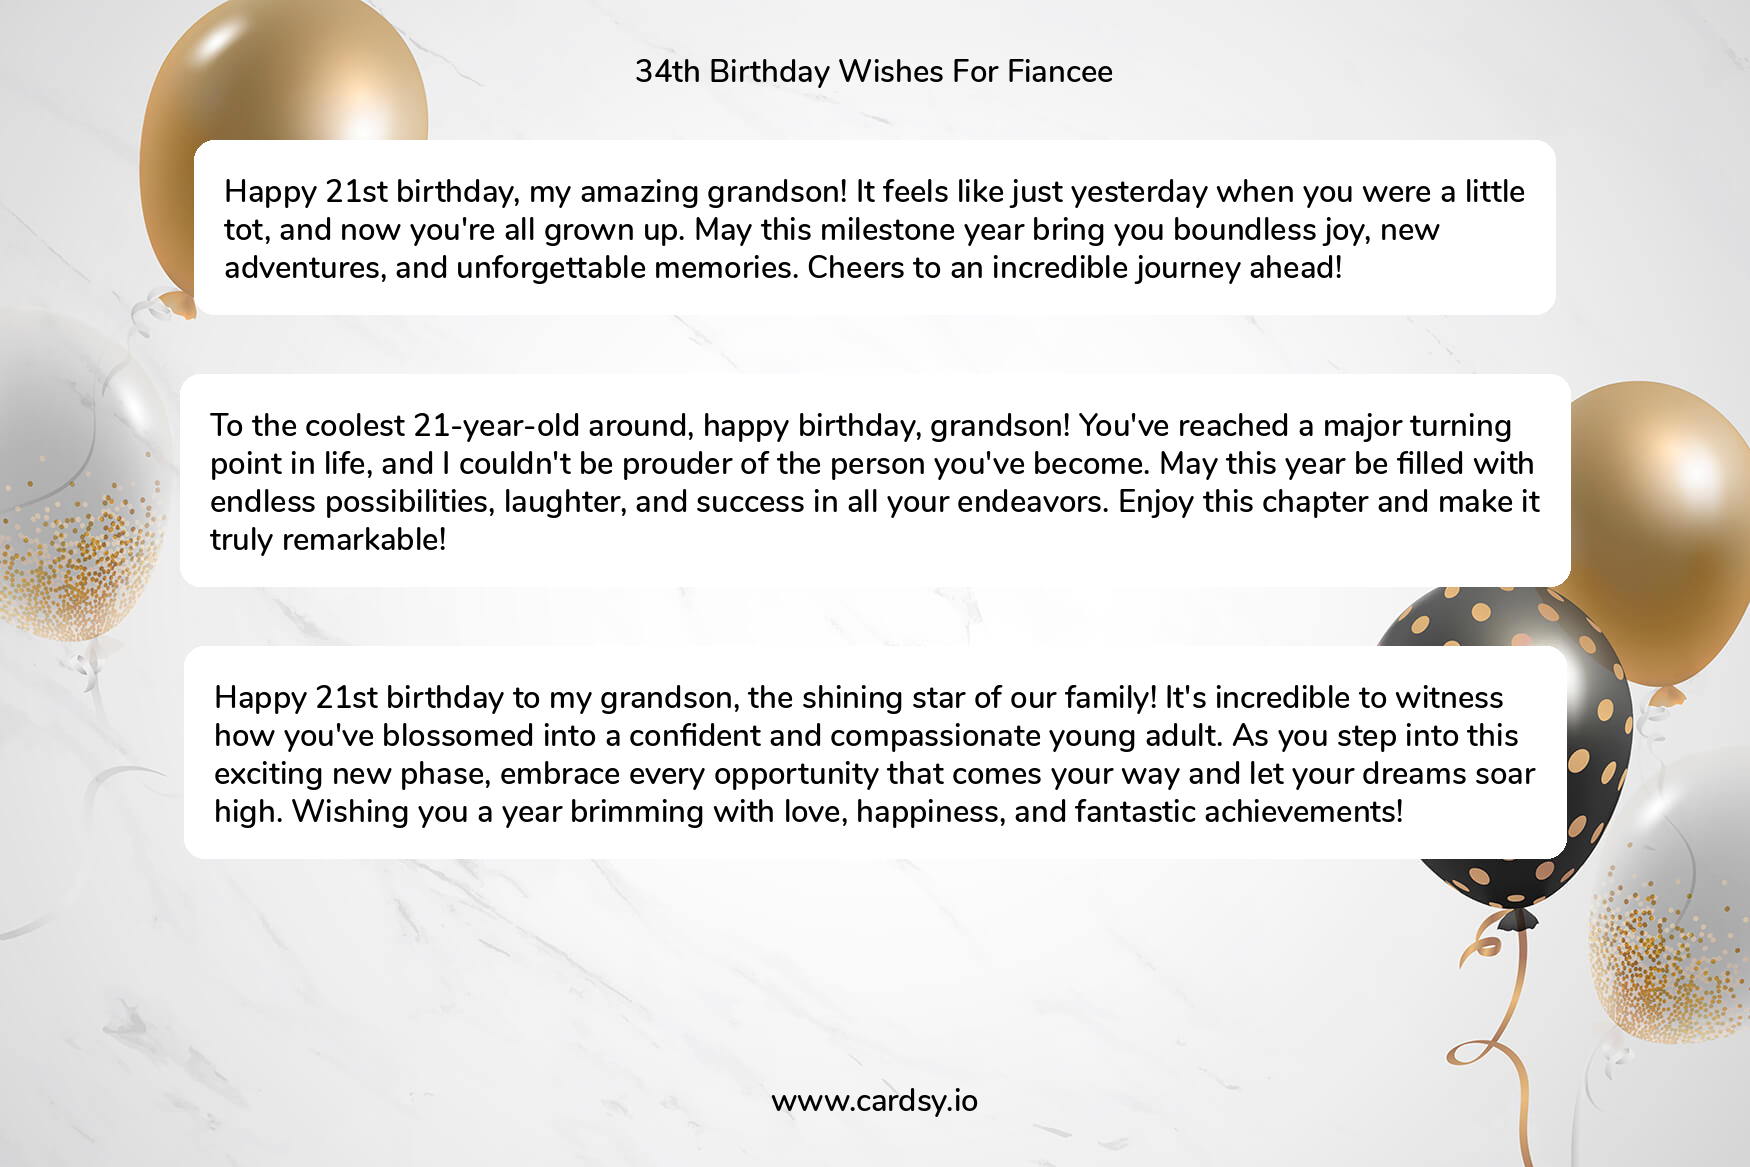 Happy 34th Birthday Sayings for Fiancee